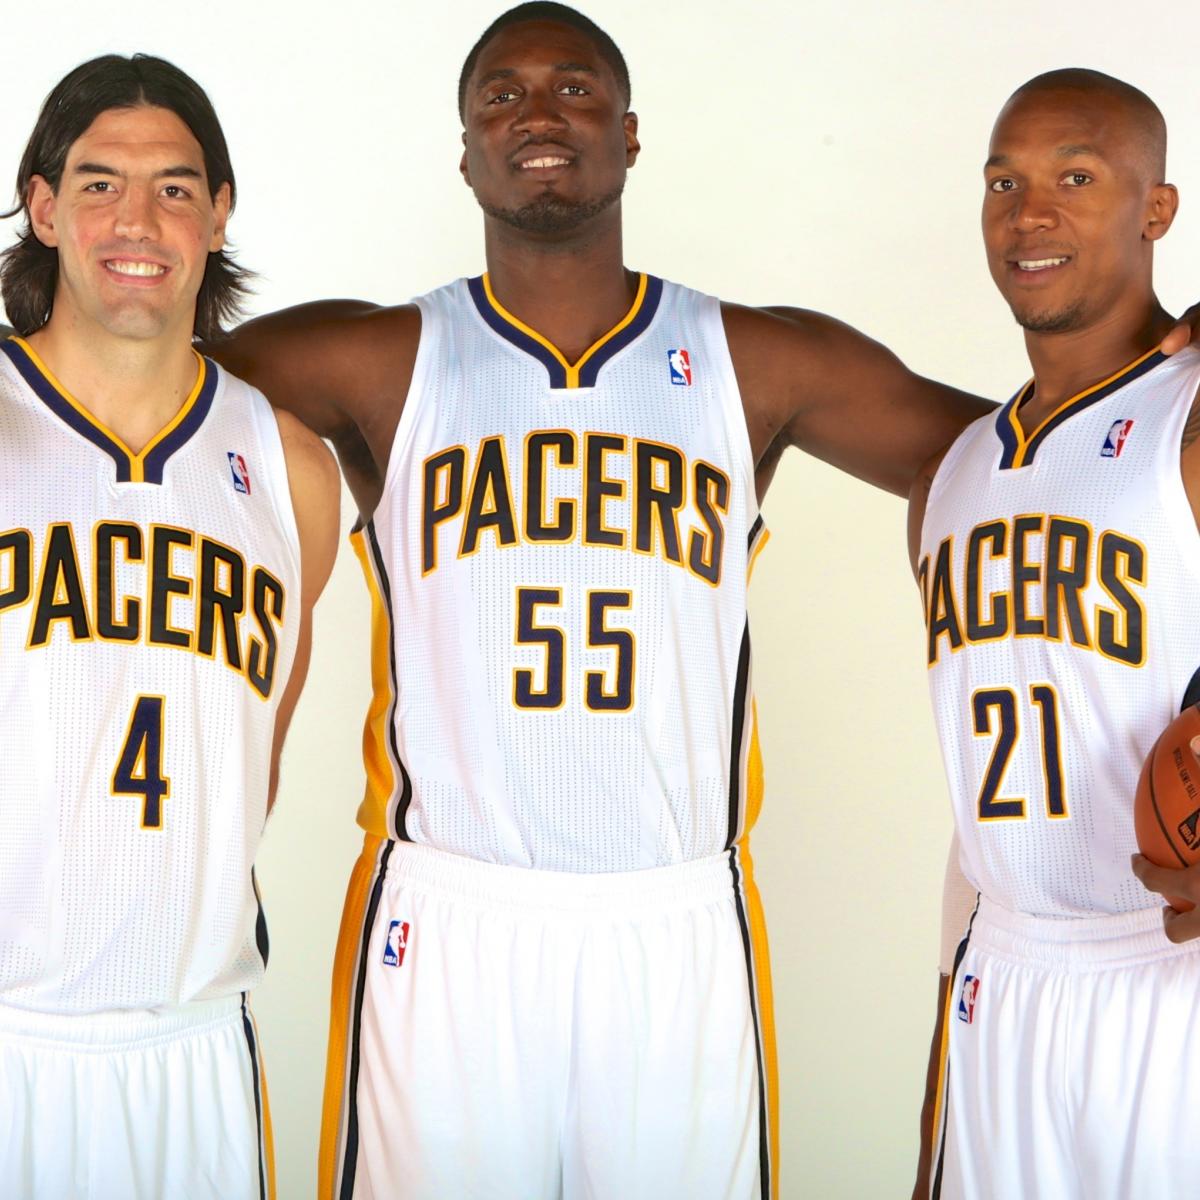 Revisiting the 2014 Indiana Pacers